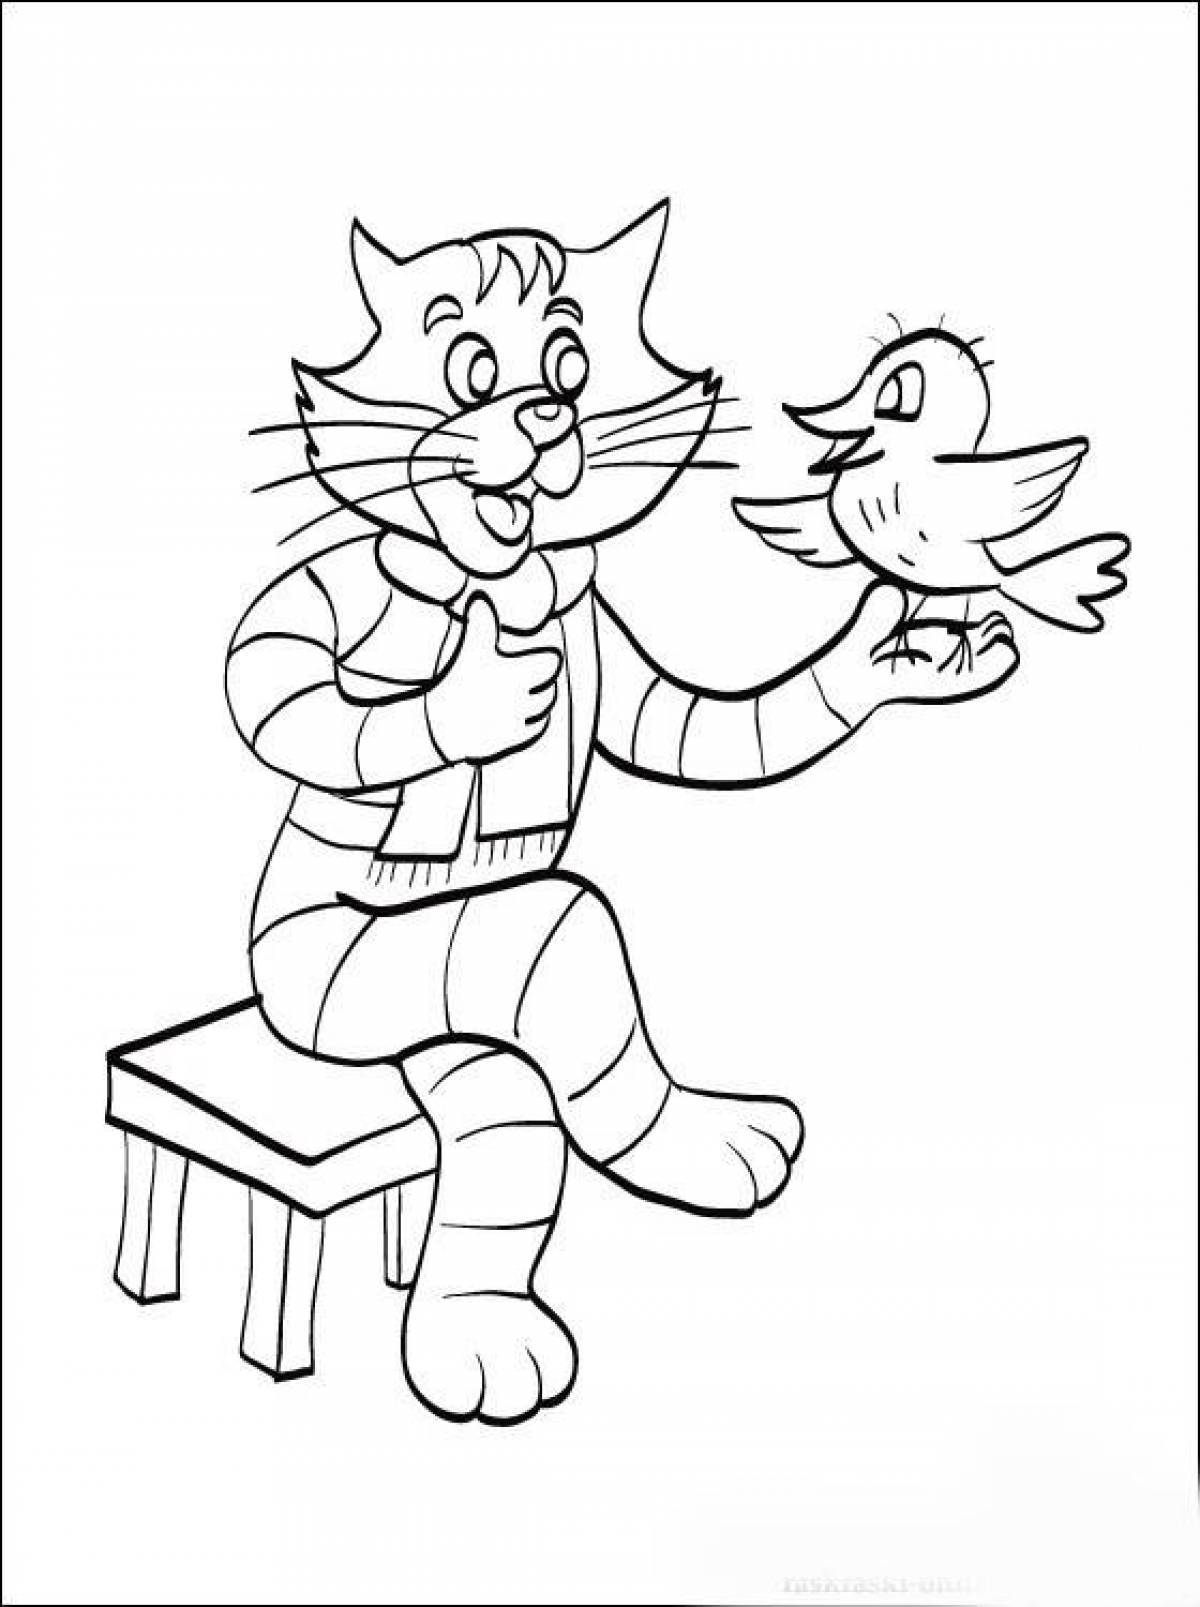 Coloring page cheeky cat matroskin